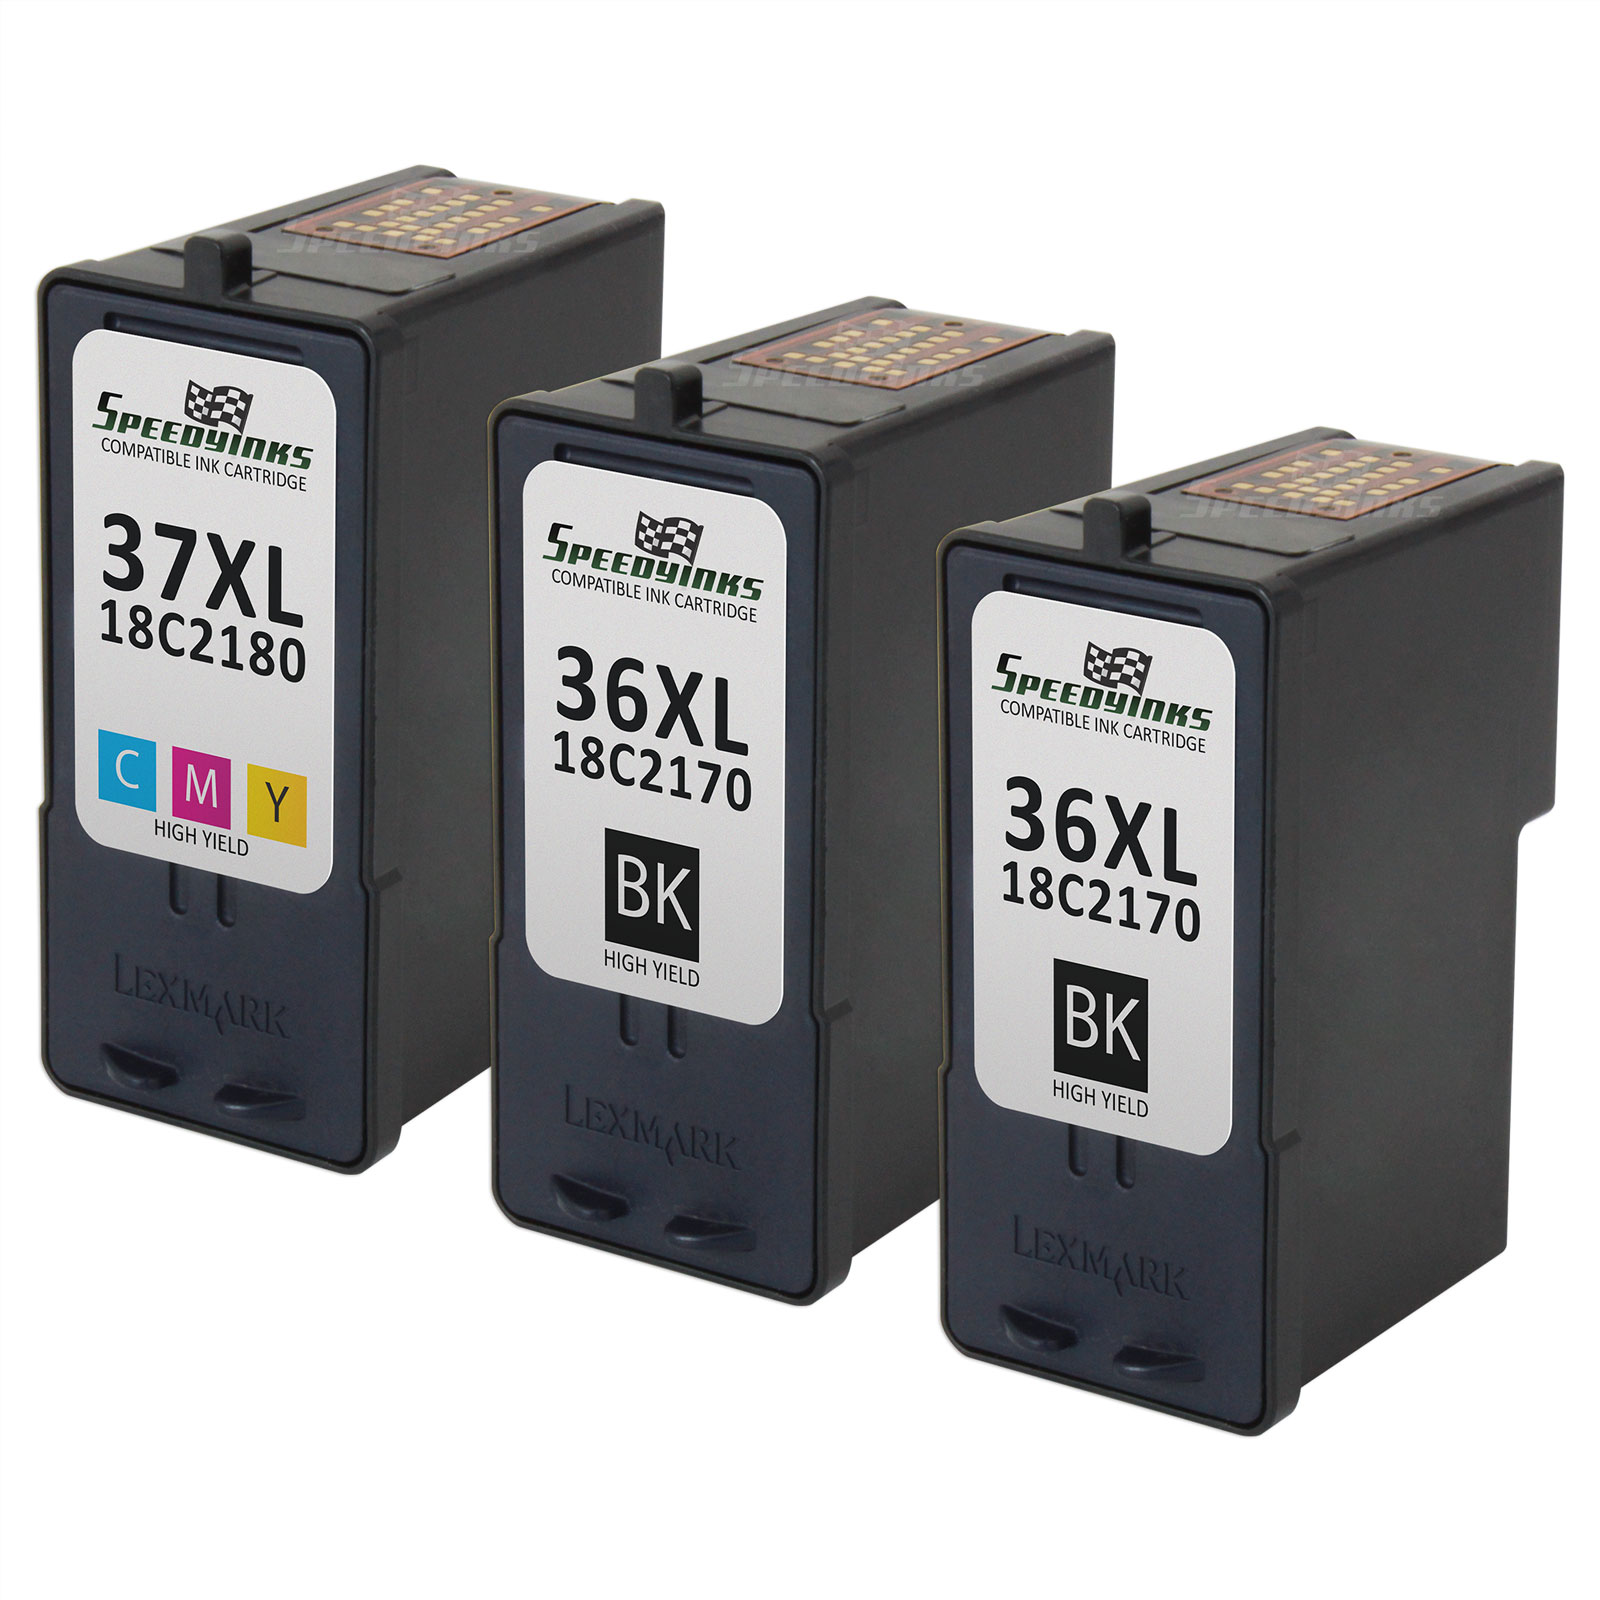 Speedy Inks - Remanufactured Lexmark 2 36XL 18C2170 High Yield Black & 1 37XL 18C2180 High Yield Color Ink Cartridges For Lexmark X3650, X4650, X5650, X5650es, X6650, X6675, Z2420 - image 5 of 5